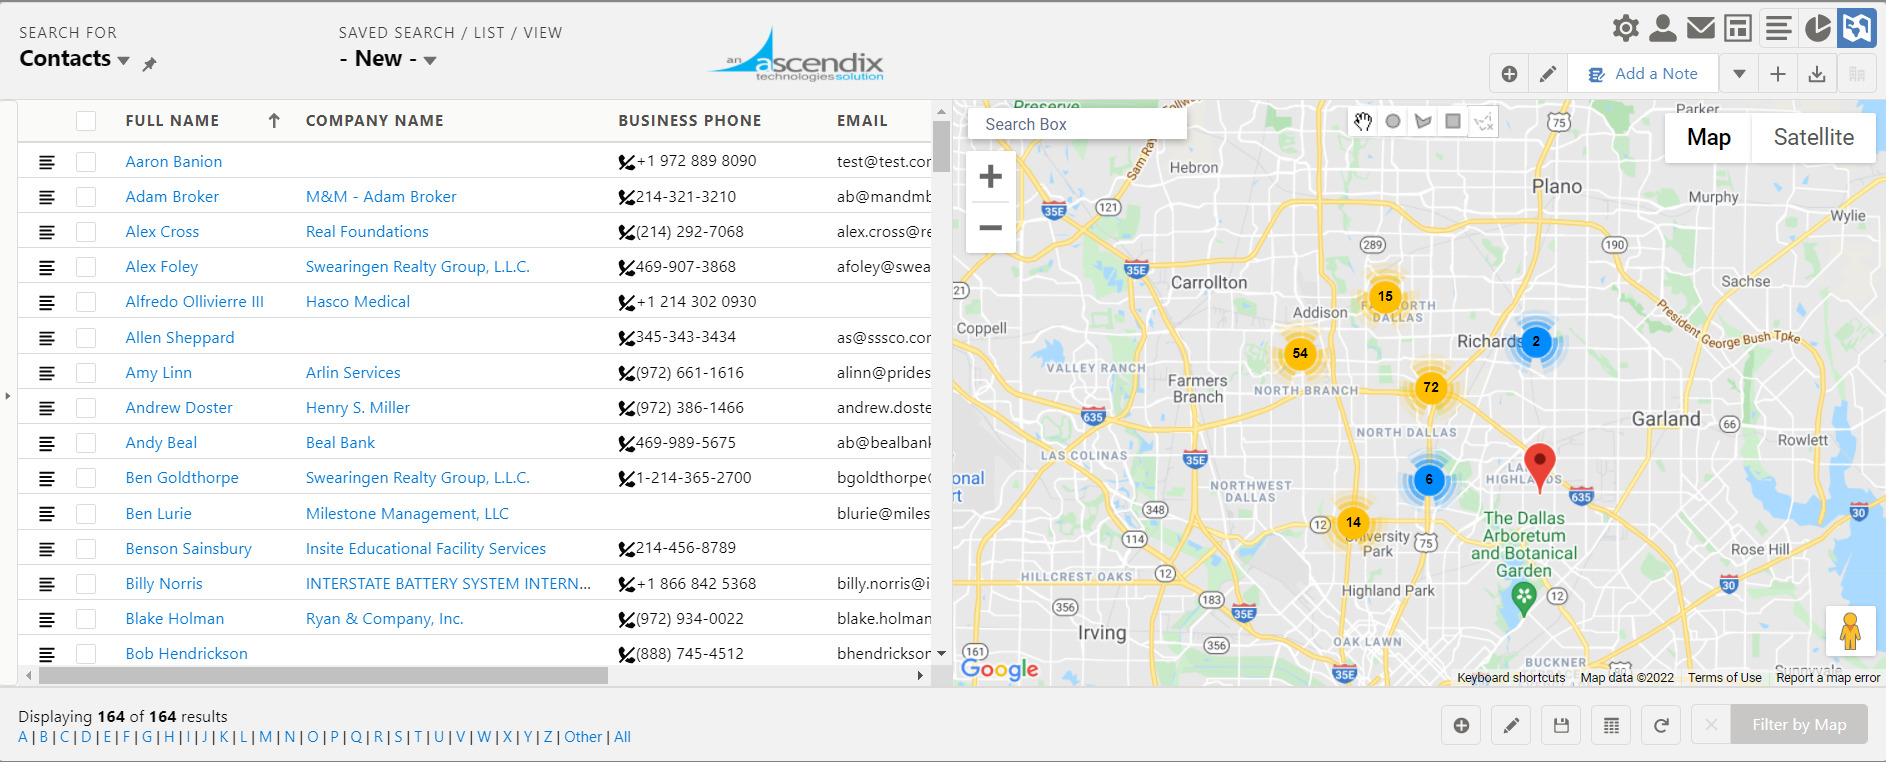 radius search for Contacts within 5 miles from selected company